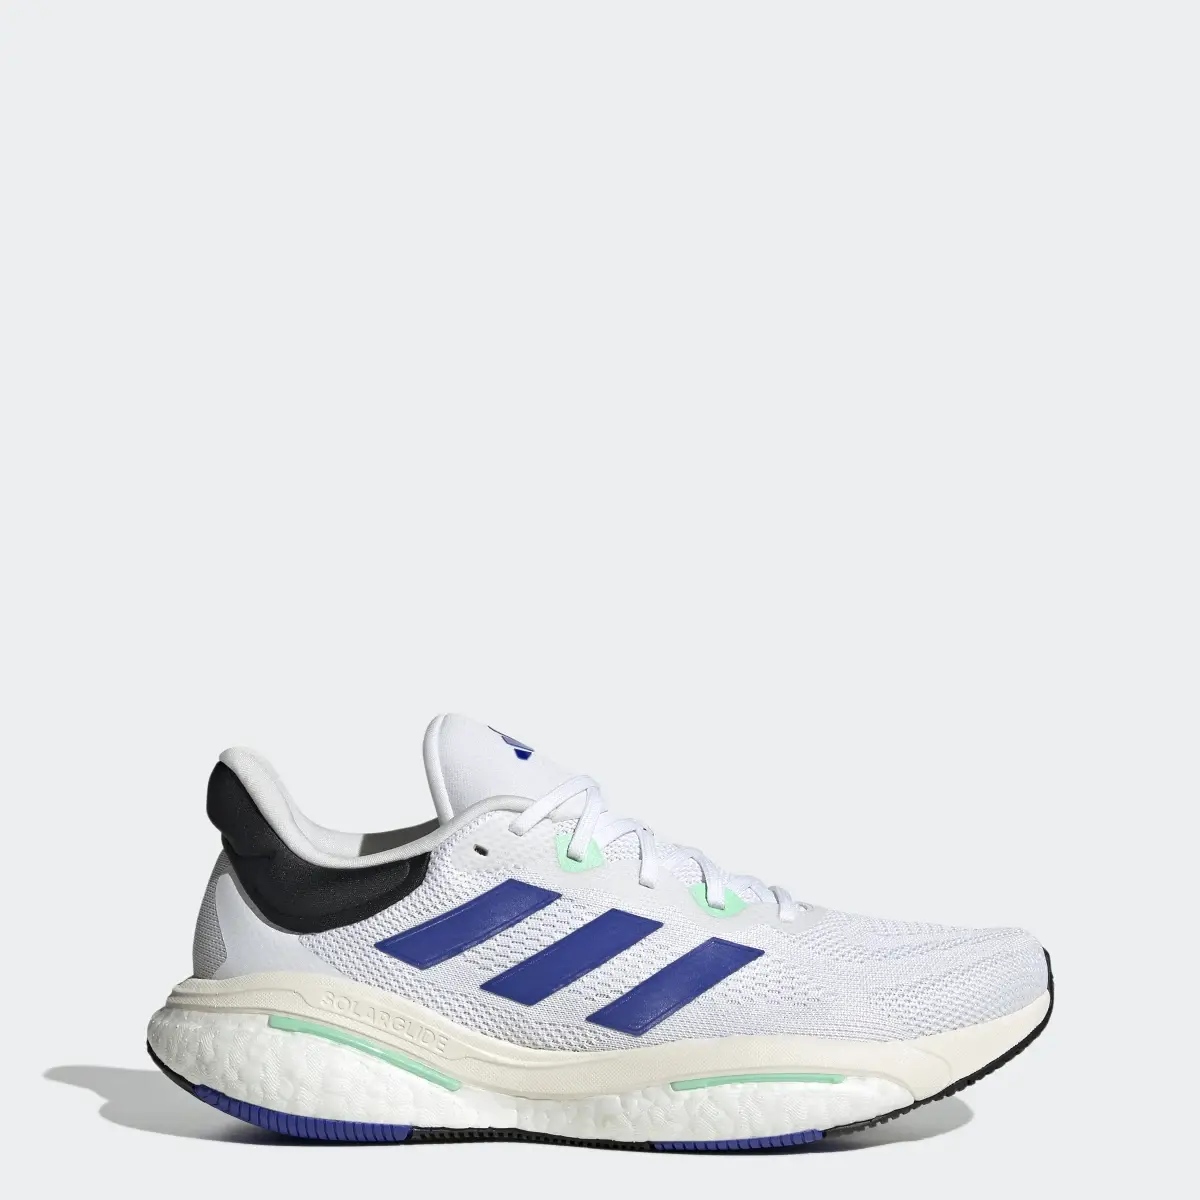 Adidas Solarglide 6 Running Shoes. 1